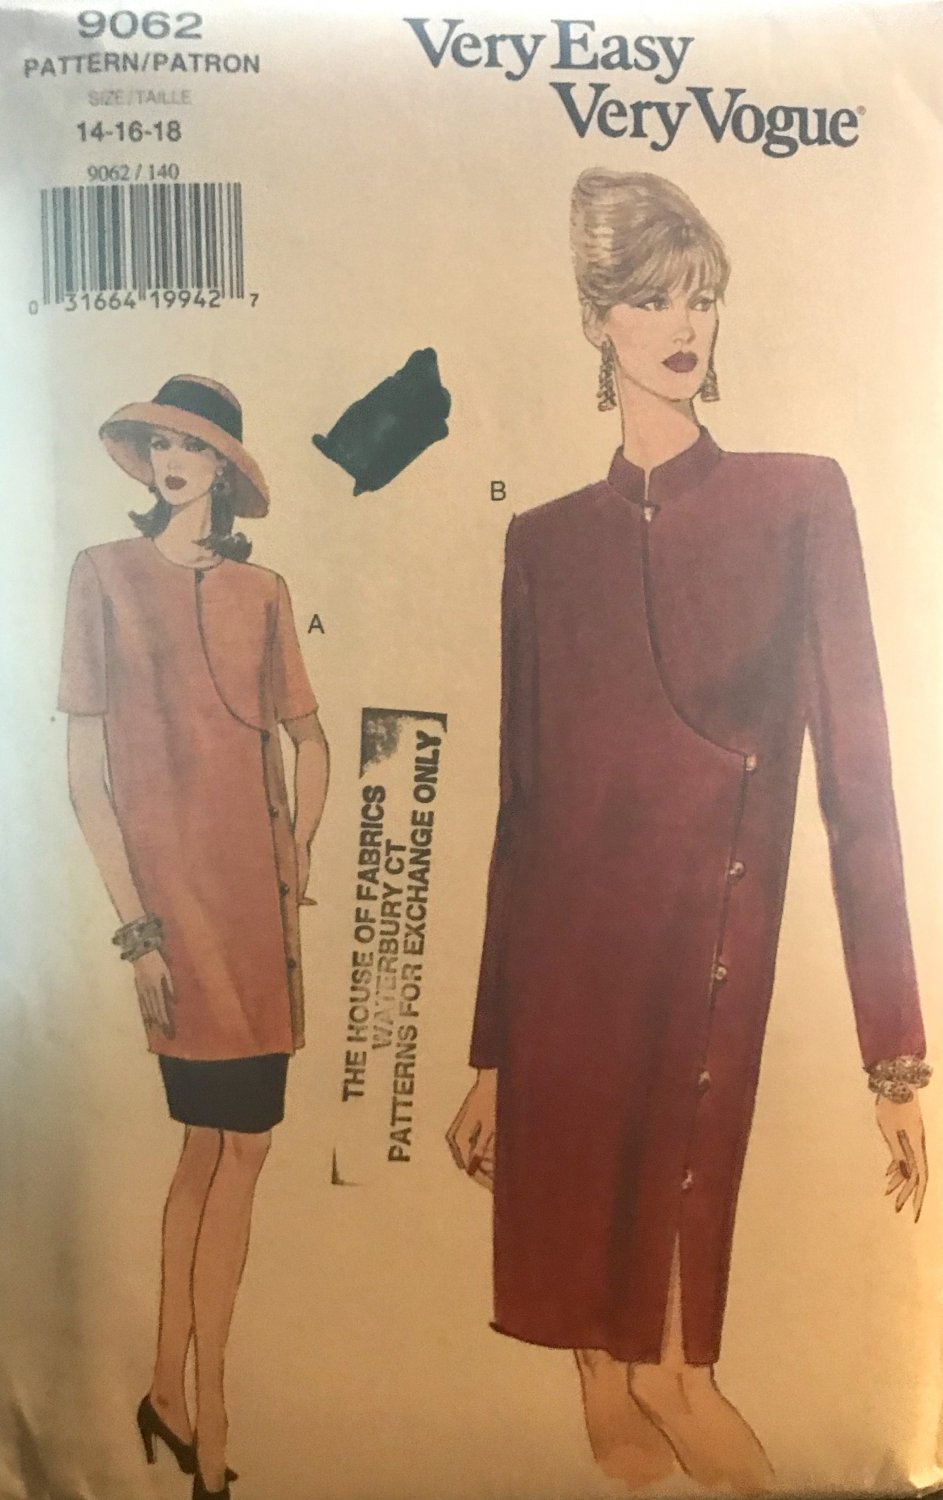 Vogue 9062 Misses' Dress, Tunic & Skirt Sewing Pattern  Size 14-16-18